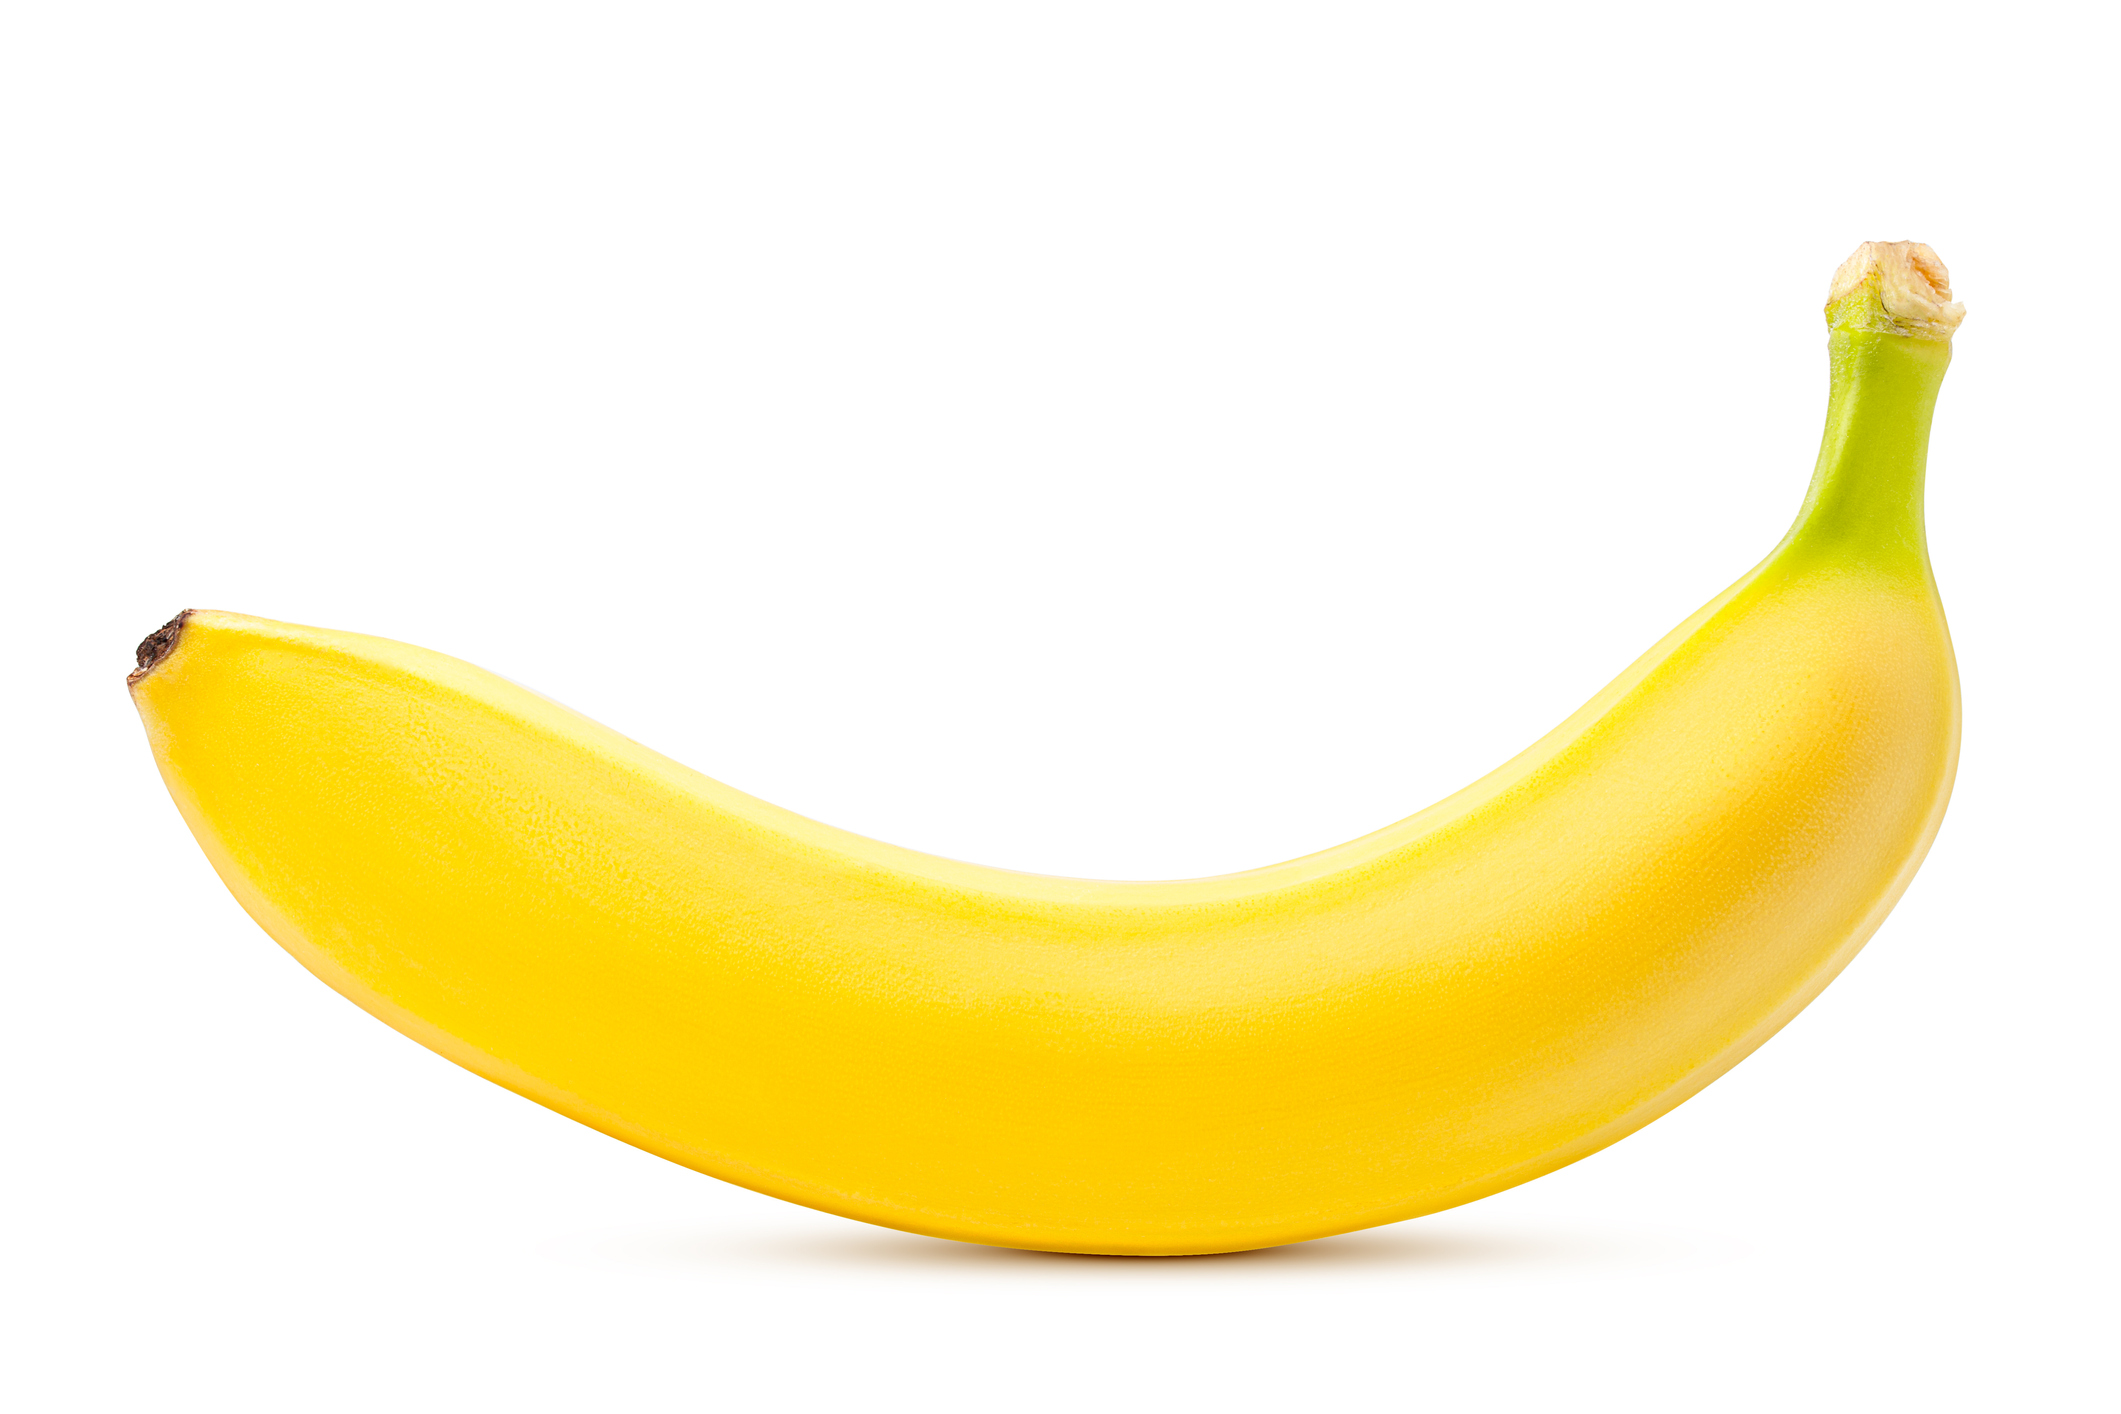 How much do you pay for a banana in the Hamptons?